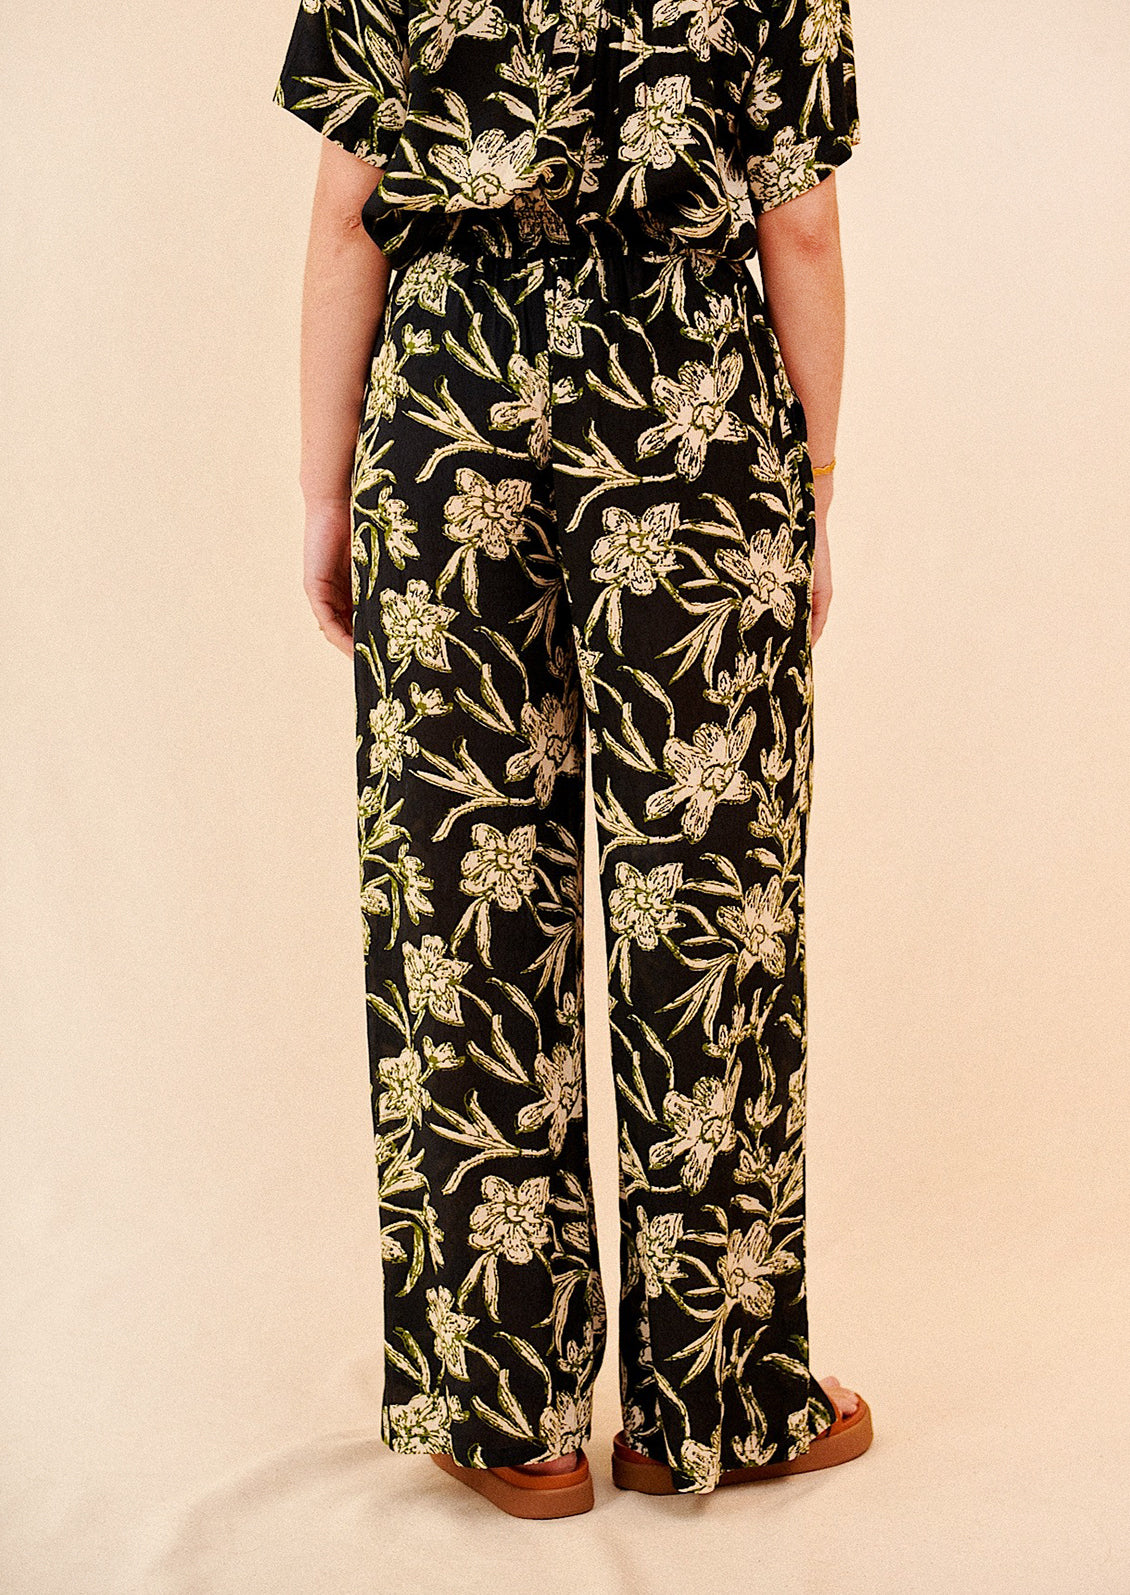 A pair of flowy pants in black with all over cream and green floral print.